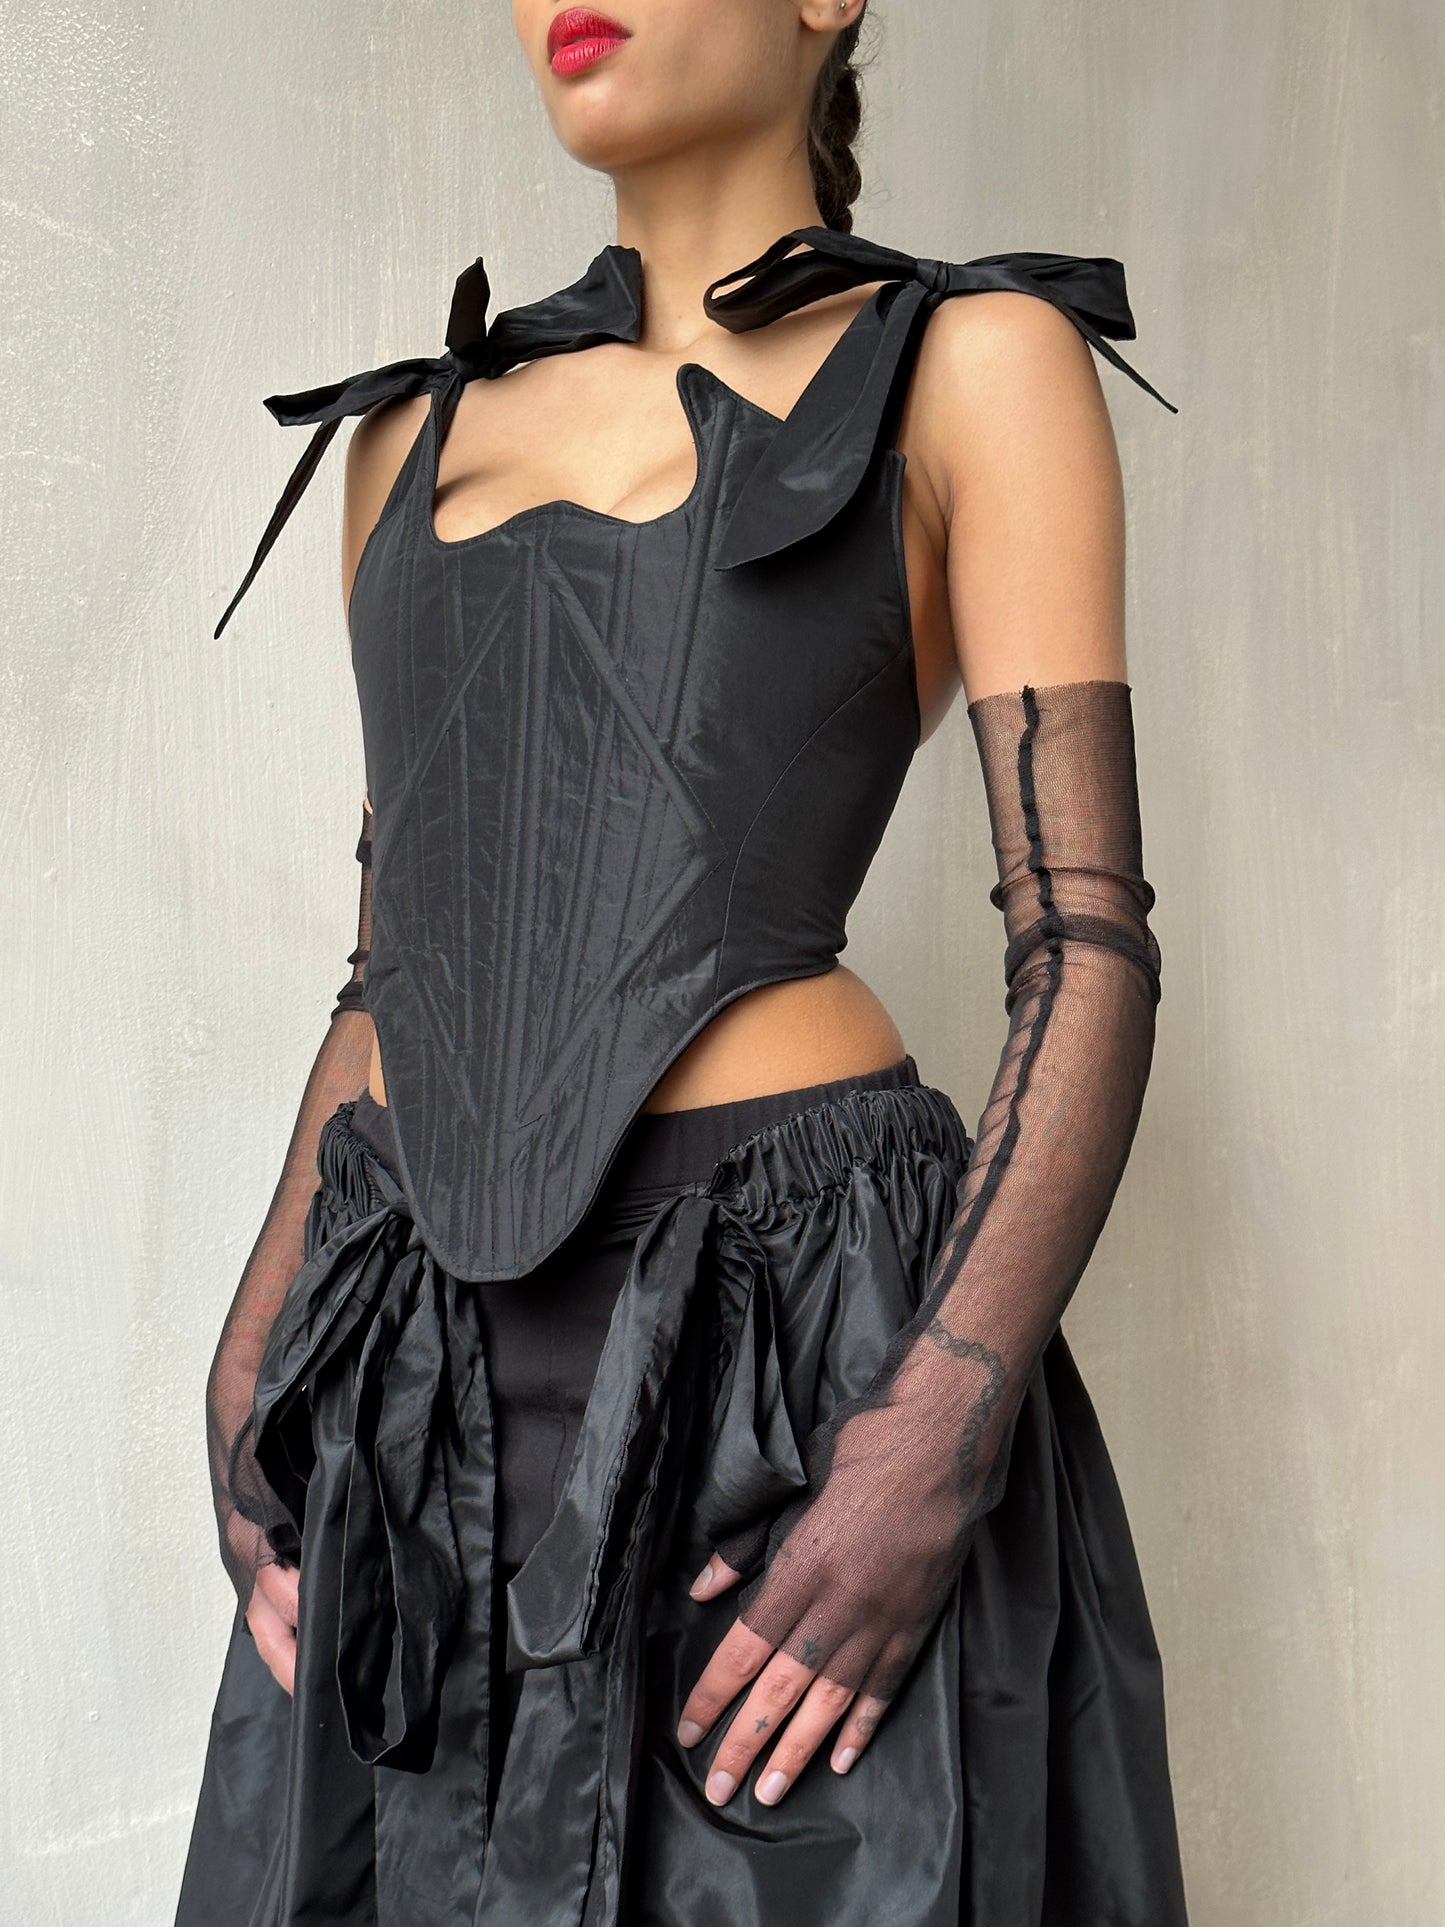 Spring '24 Diamond Demon Stays and Skirt in Black Silk (Limited Edition, Pre-Order)